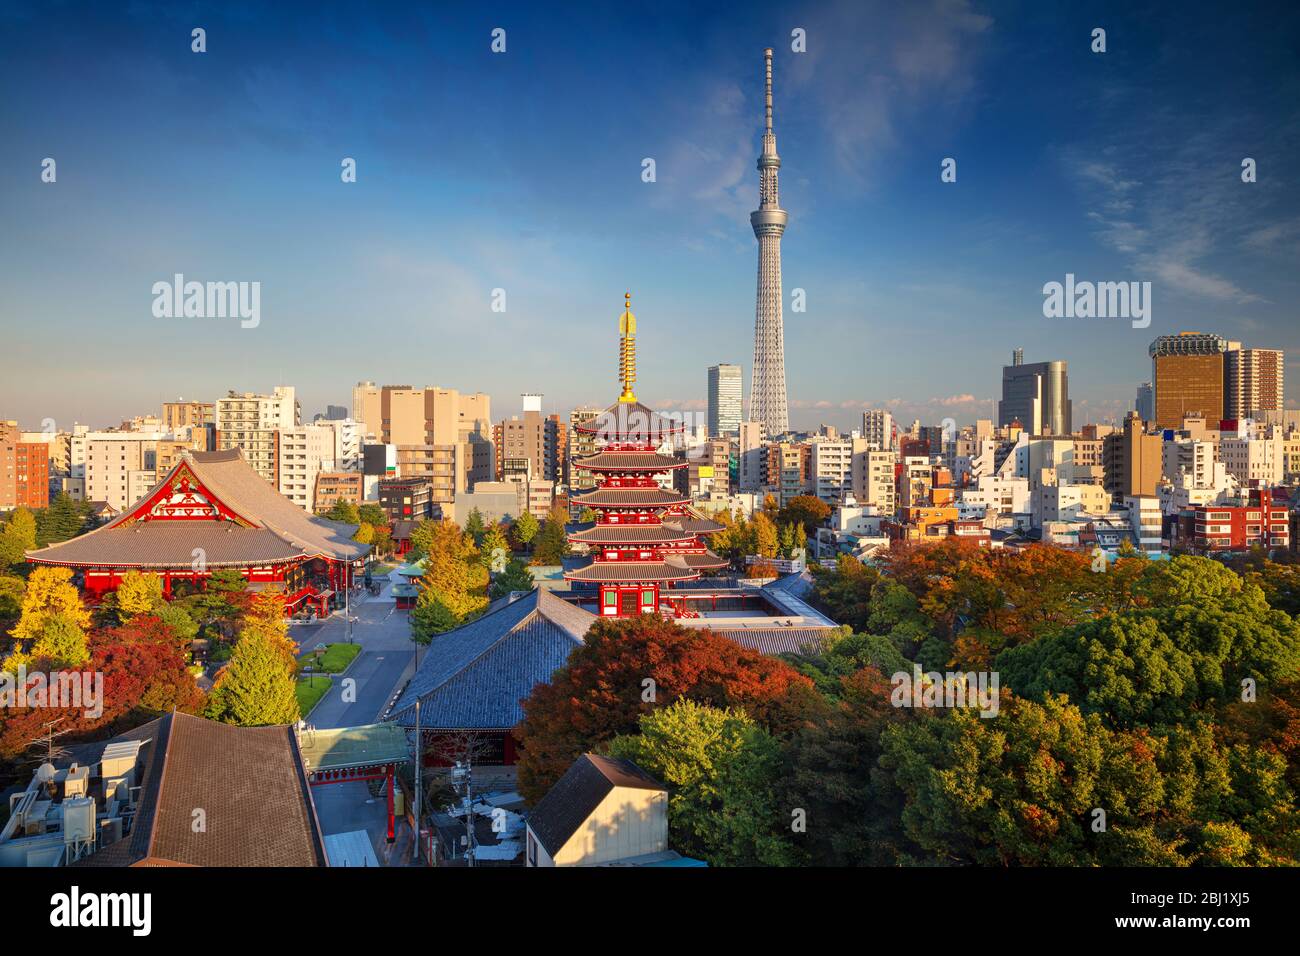 Tokyo. Cityscape image of Tokyo skyline during sunny autumn day in Japan. Stock Photo